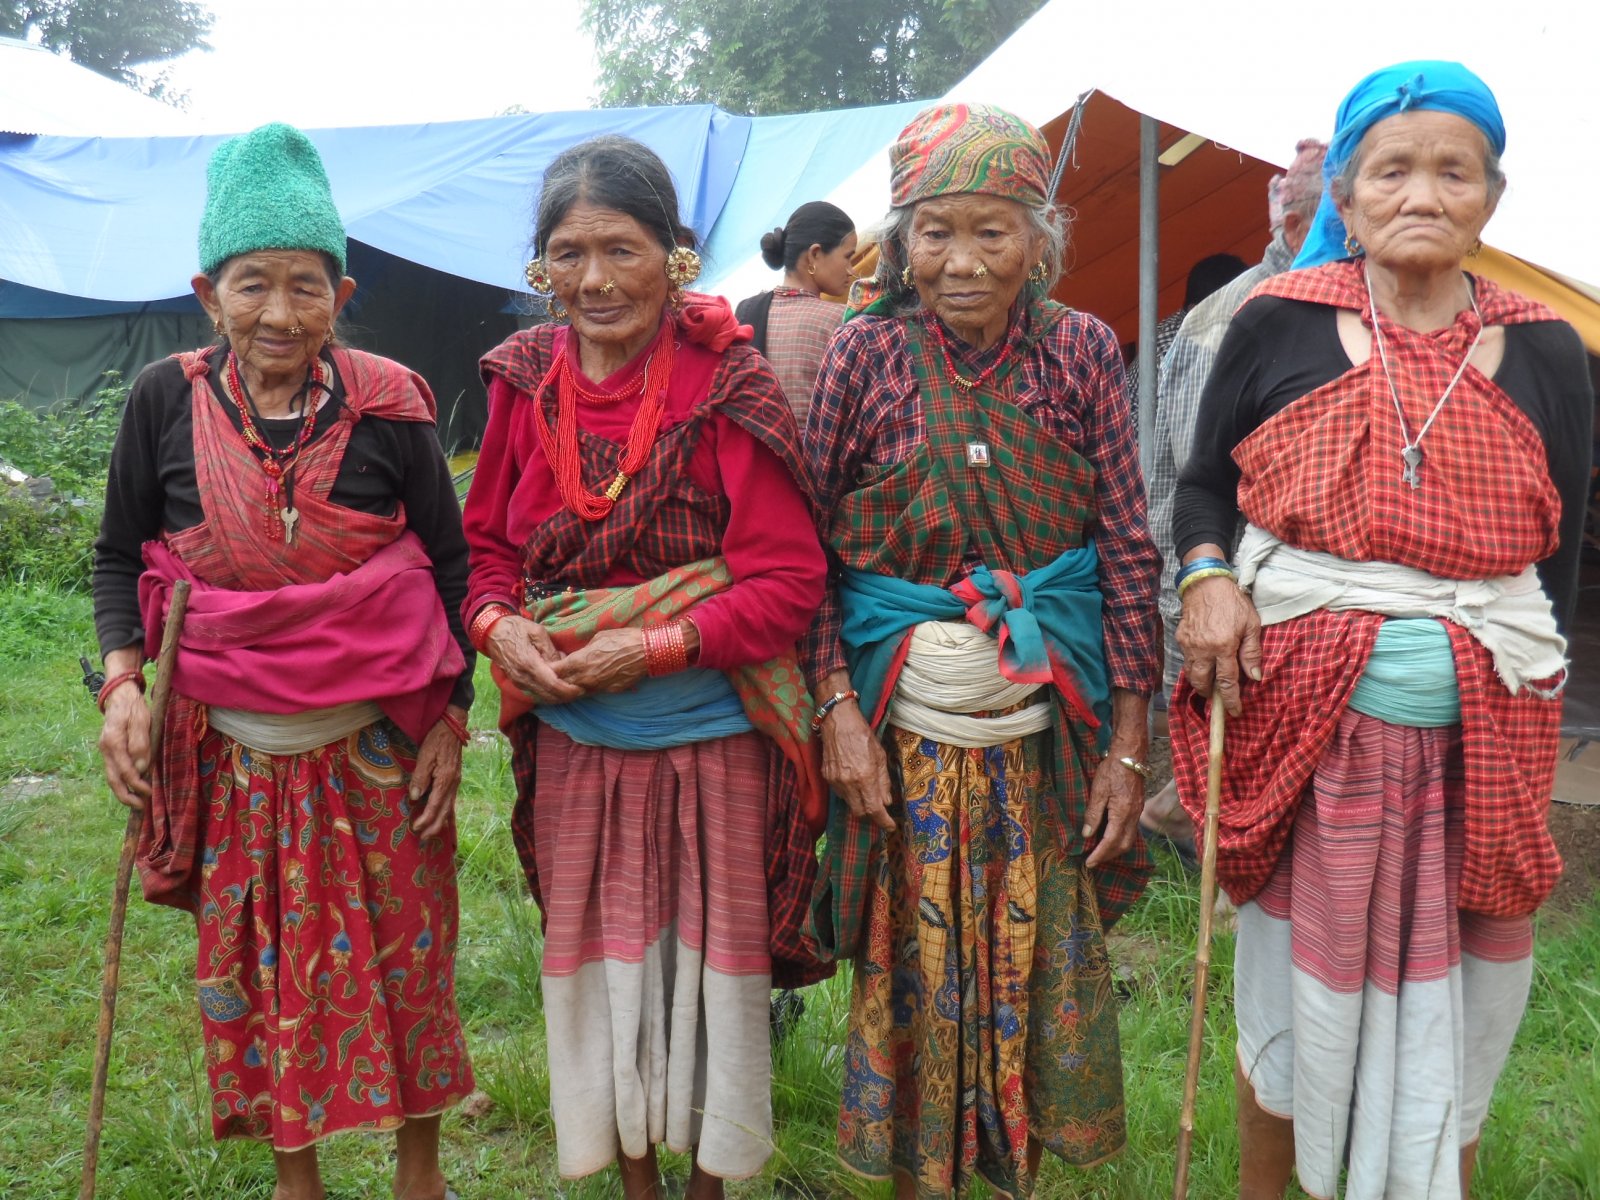 Most of these women left their farm to come join our medical camp wearing traditional clothing and jewelries